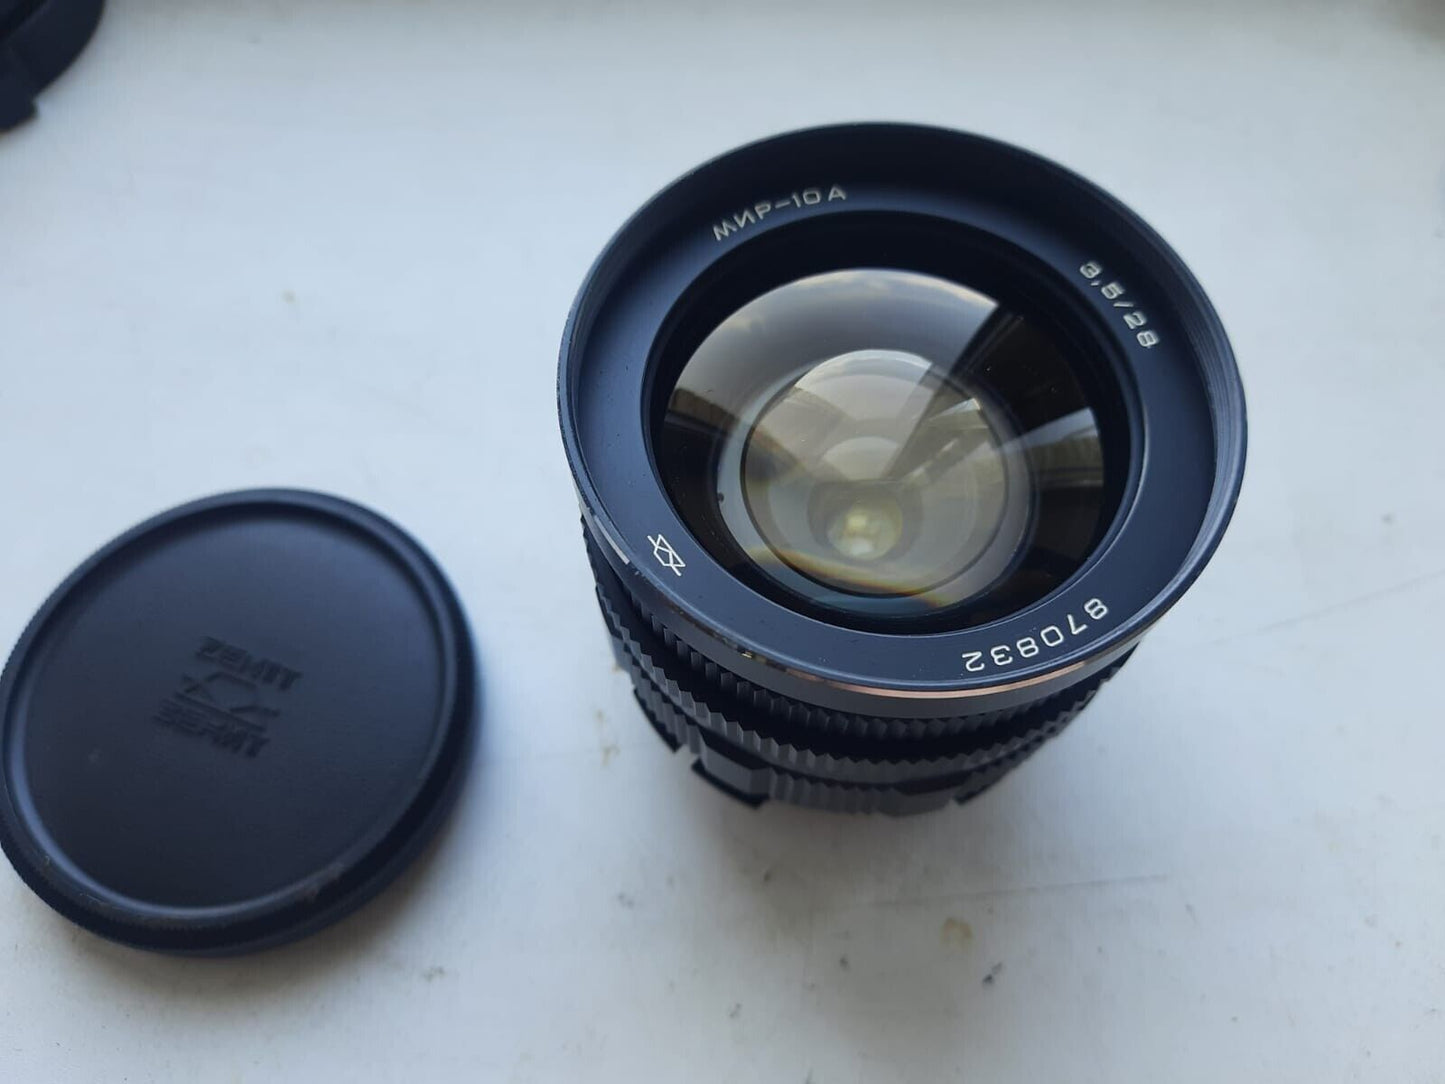 MIR-10A 28mm f/3.5 Wide angle Lens High Quality M42 or ARRI PL mount